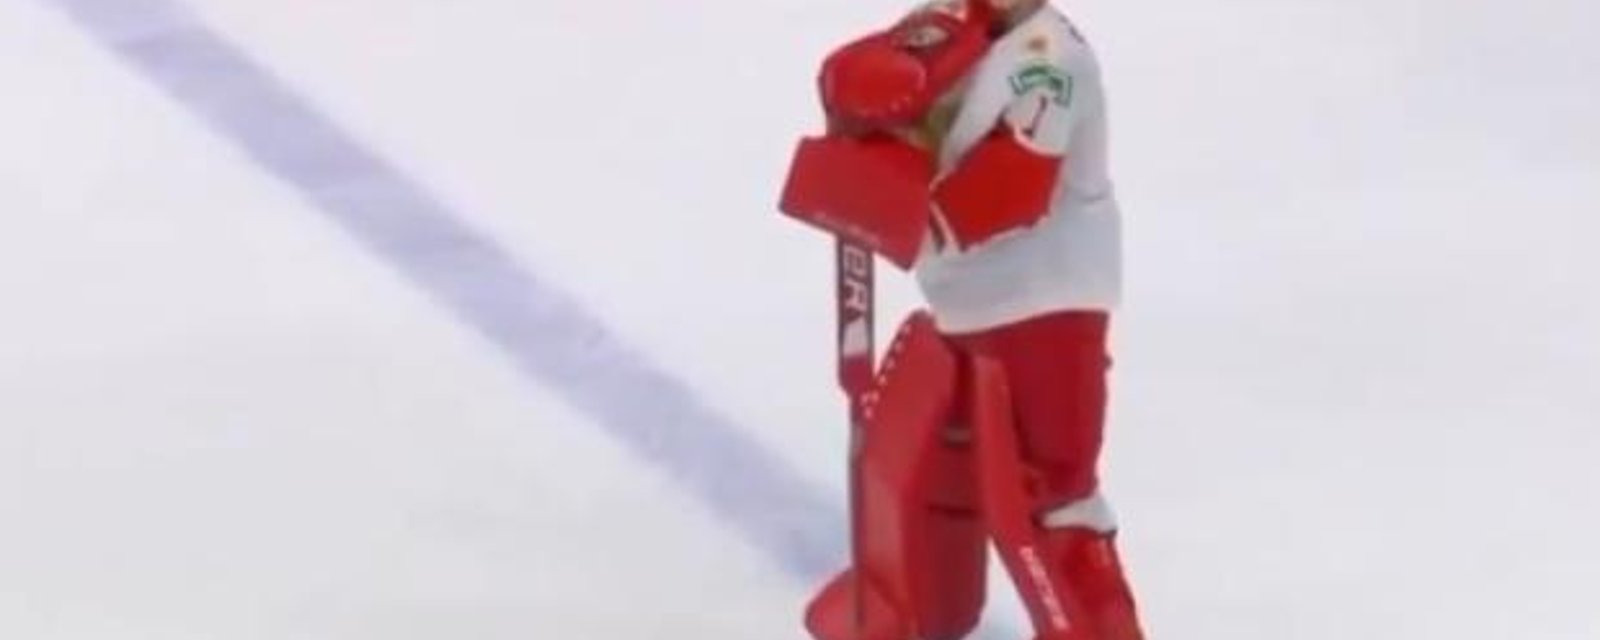 Team Russia goalie Askarov stood at the blue line and watched Team Finland celebrate by himself